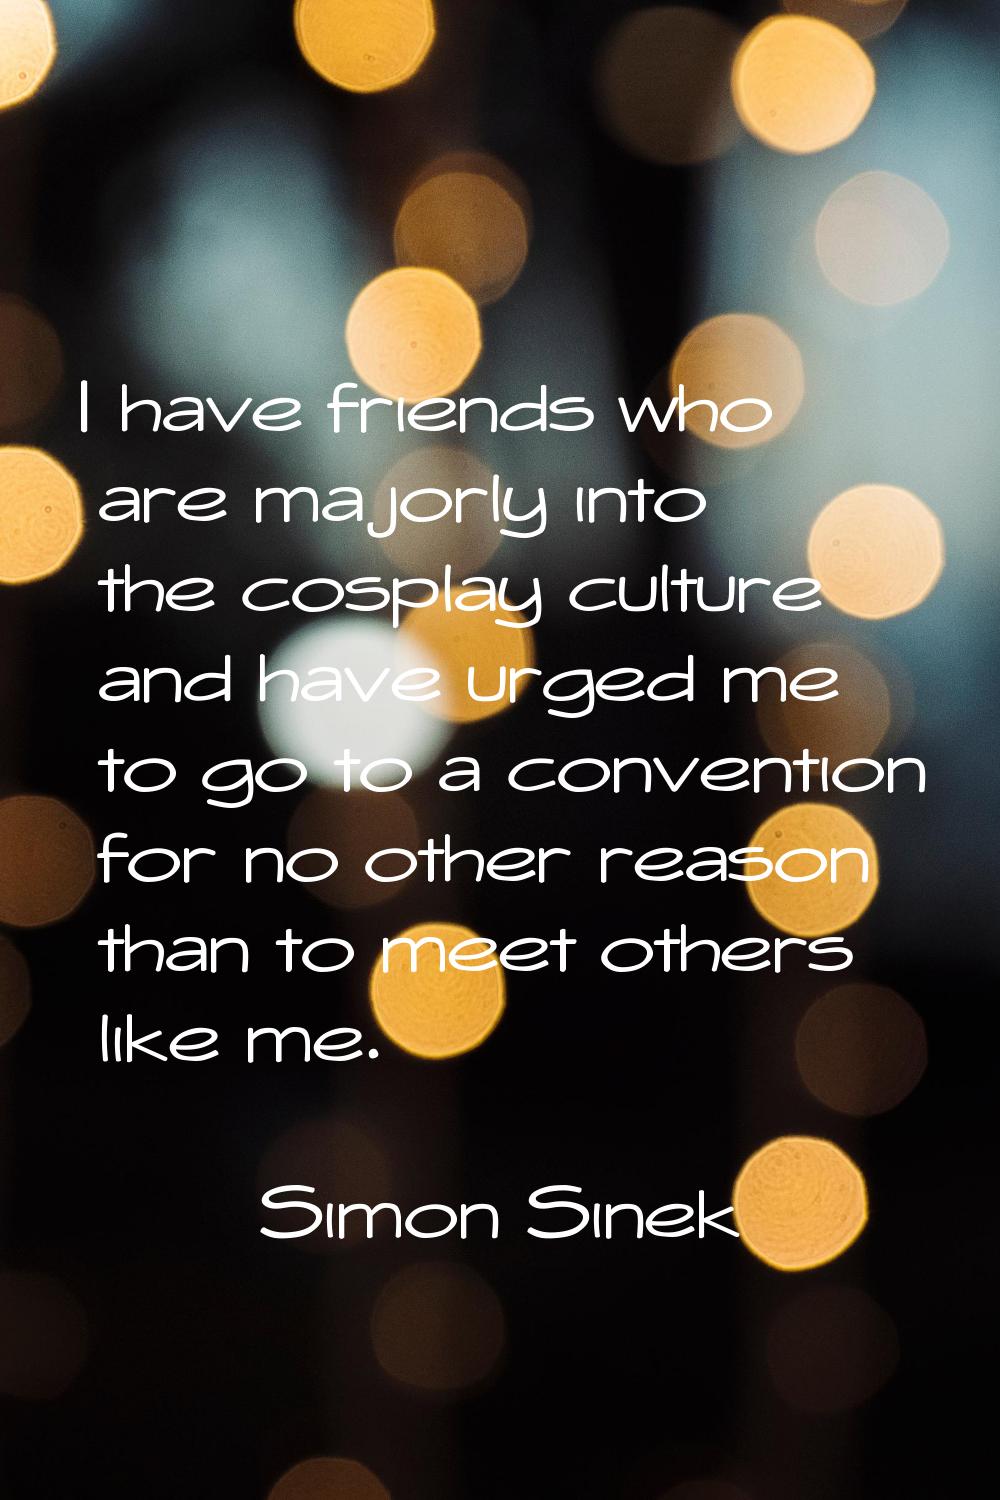 I have friends who are majorly into the cosplay culture and have urged me to go to a convention for